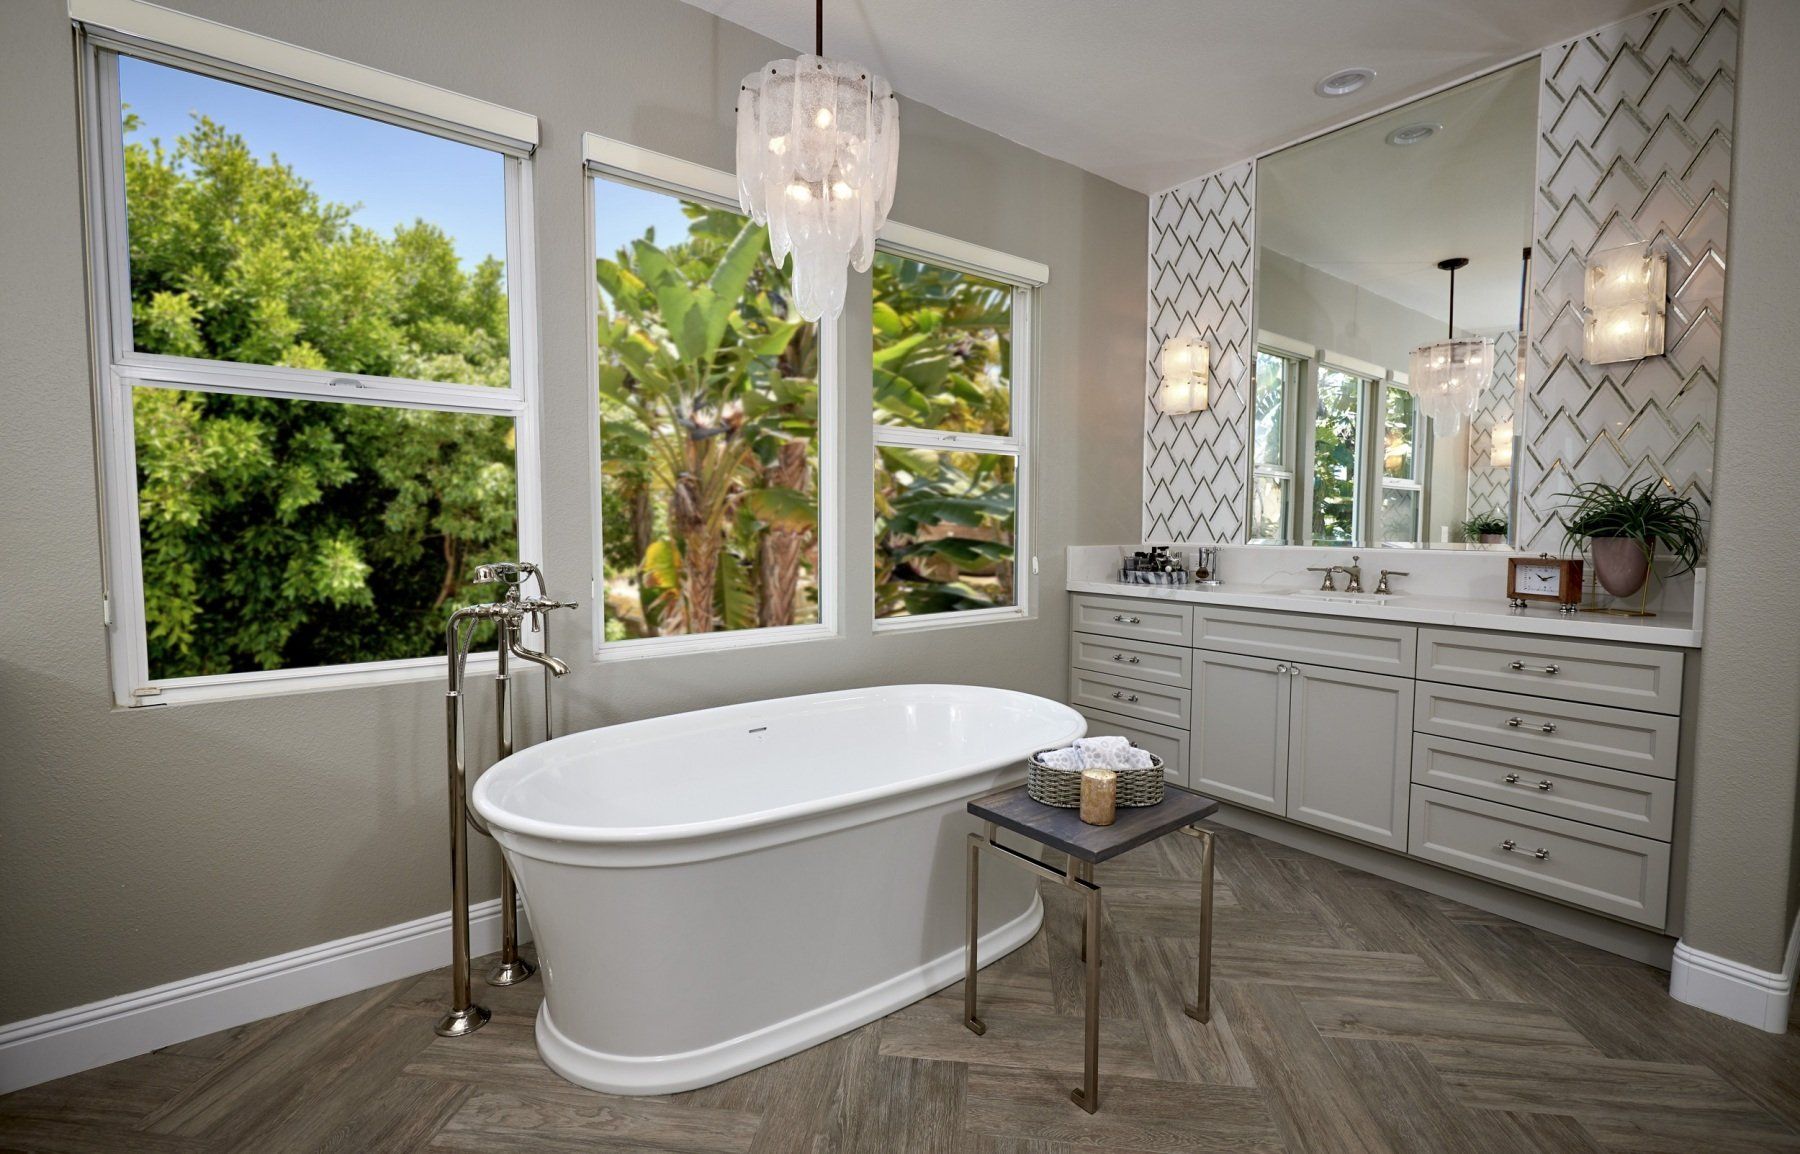 a bathtub in a bathroom with a chandelier hanging from the ceiling